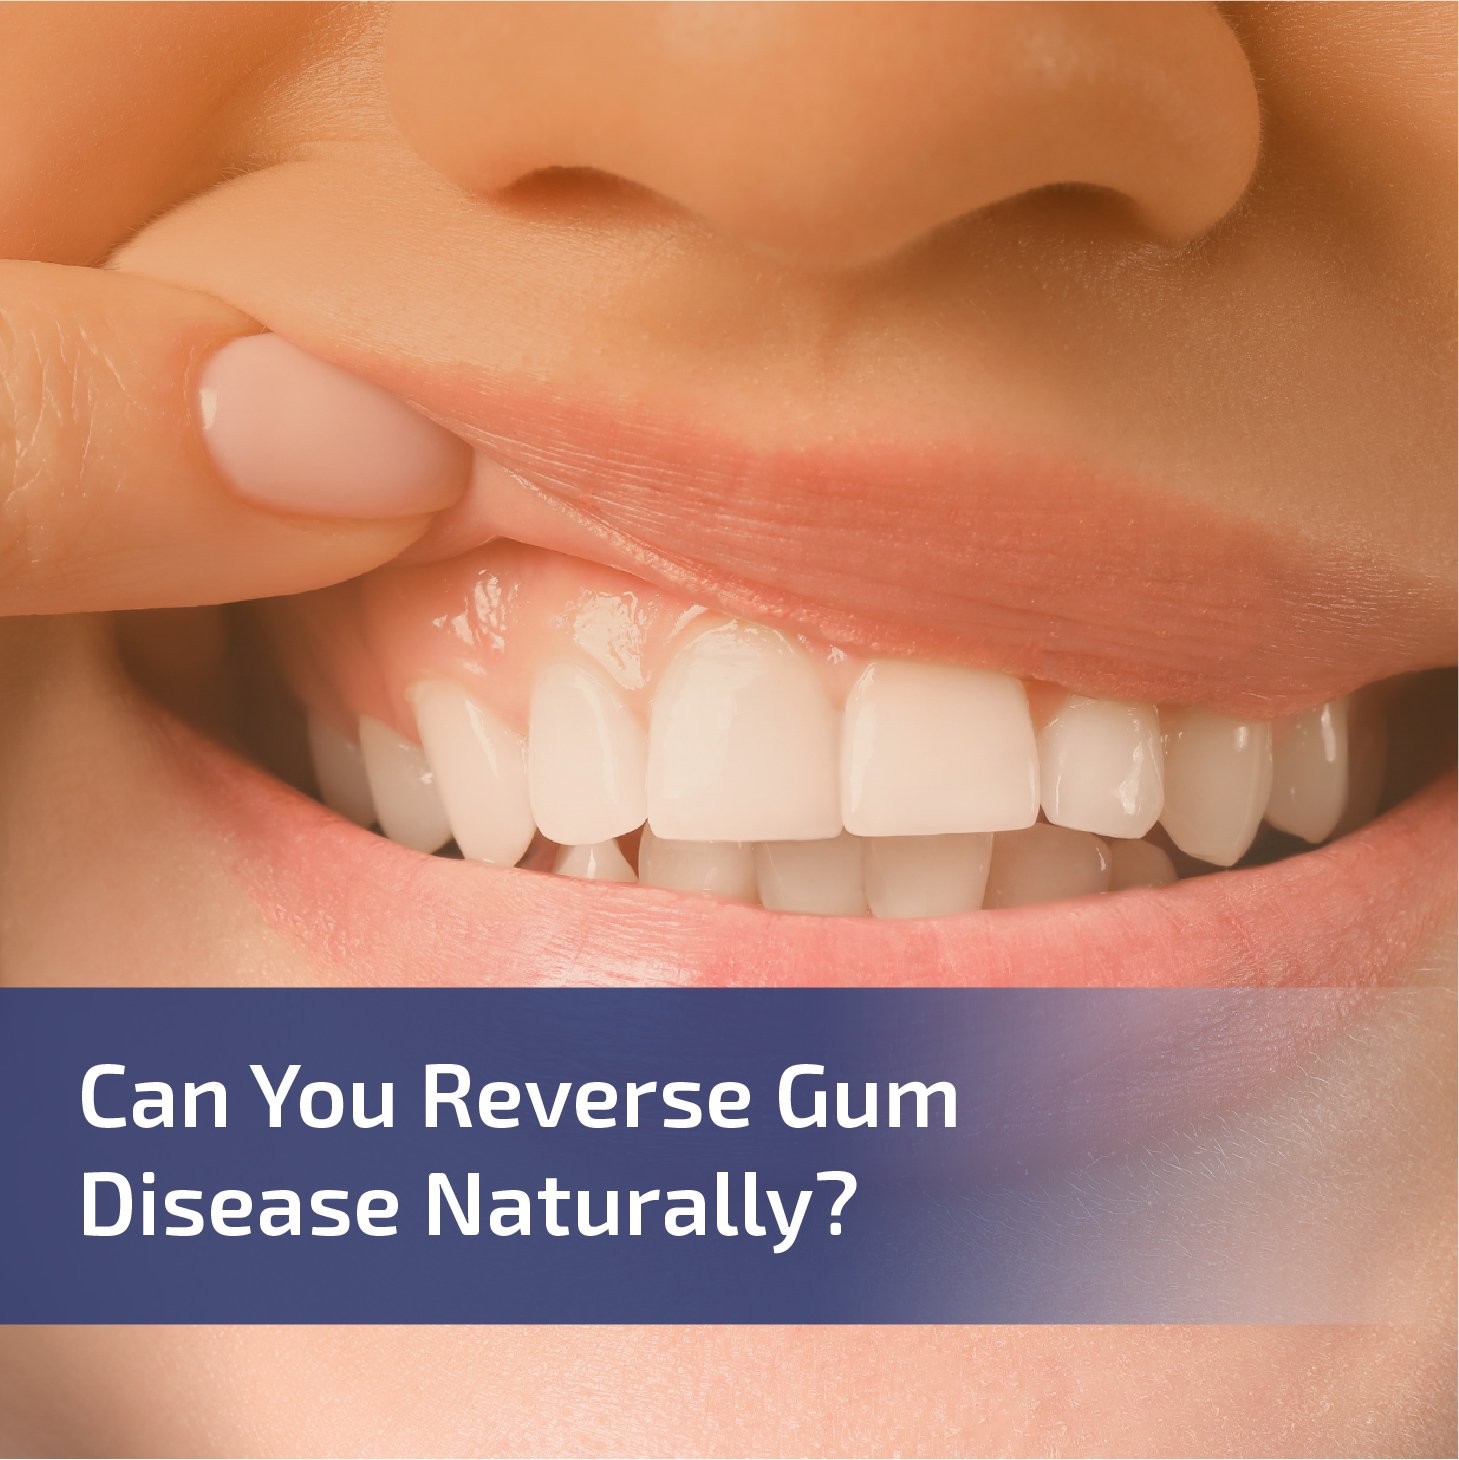 Can You Reverse Gum Disease Naturally?